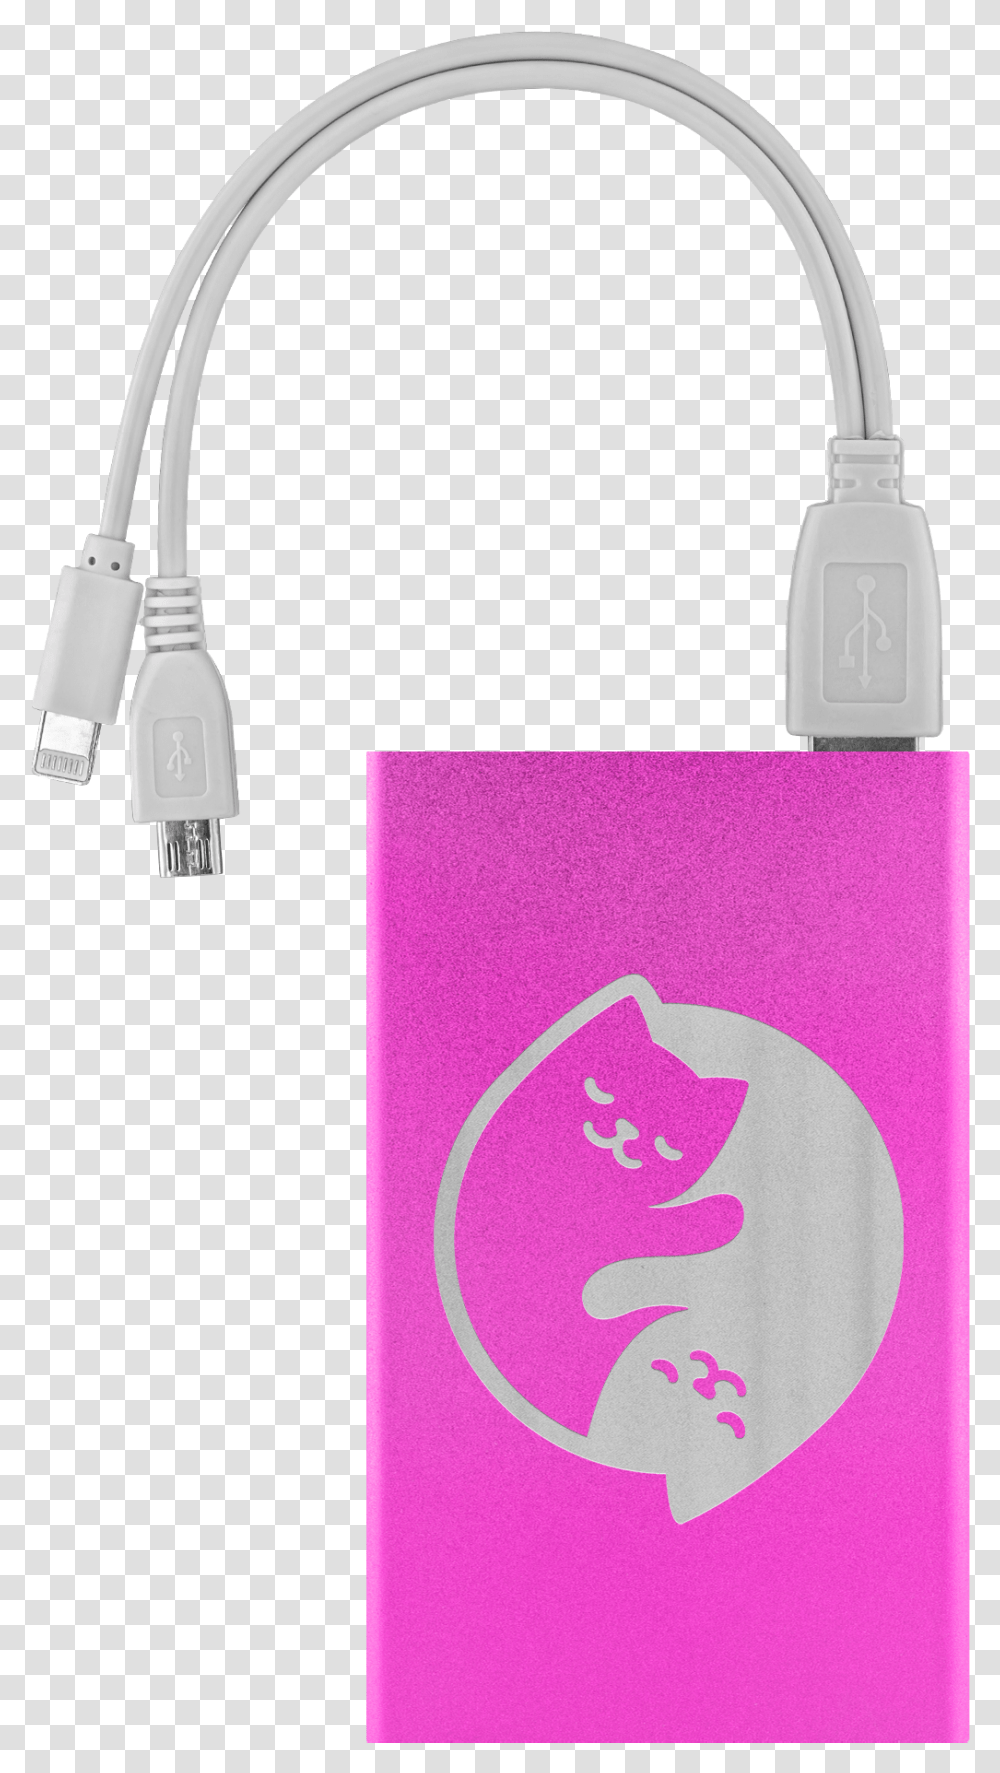 Cool Cat Power Bank Usb Cable, Adapter, Plug, Bottle Transparent Png